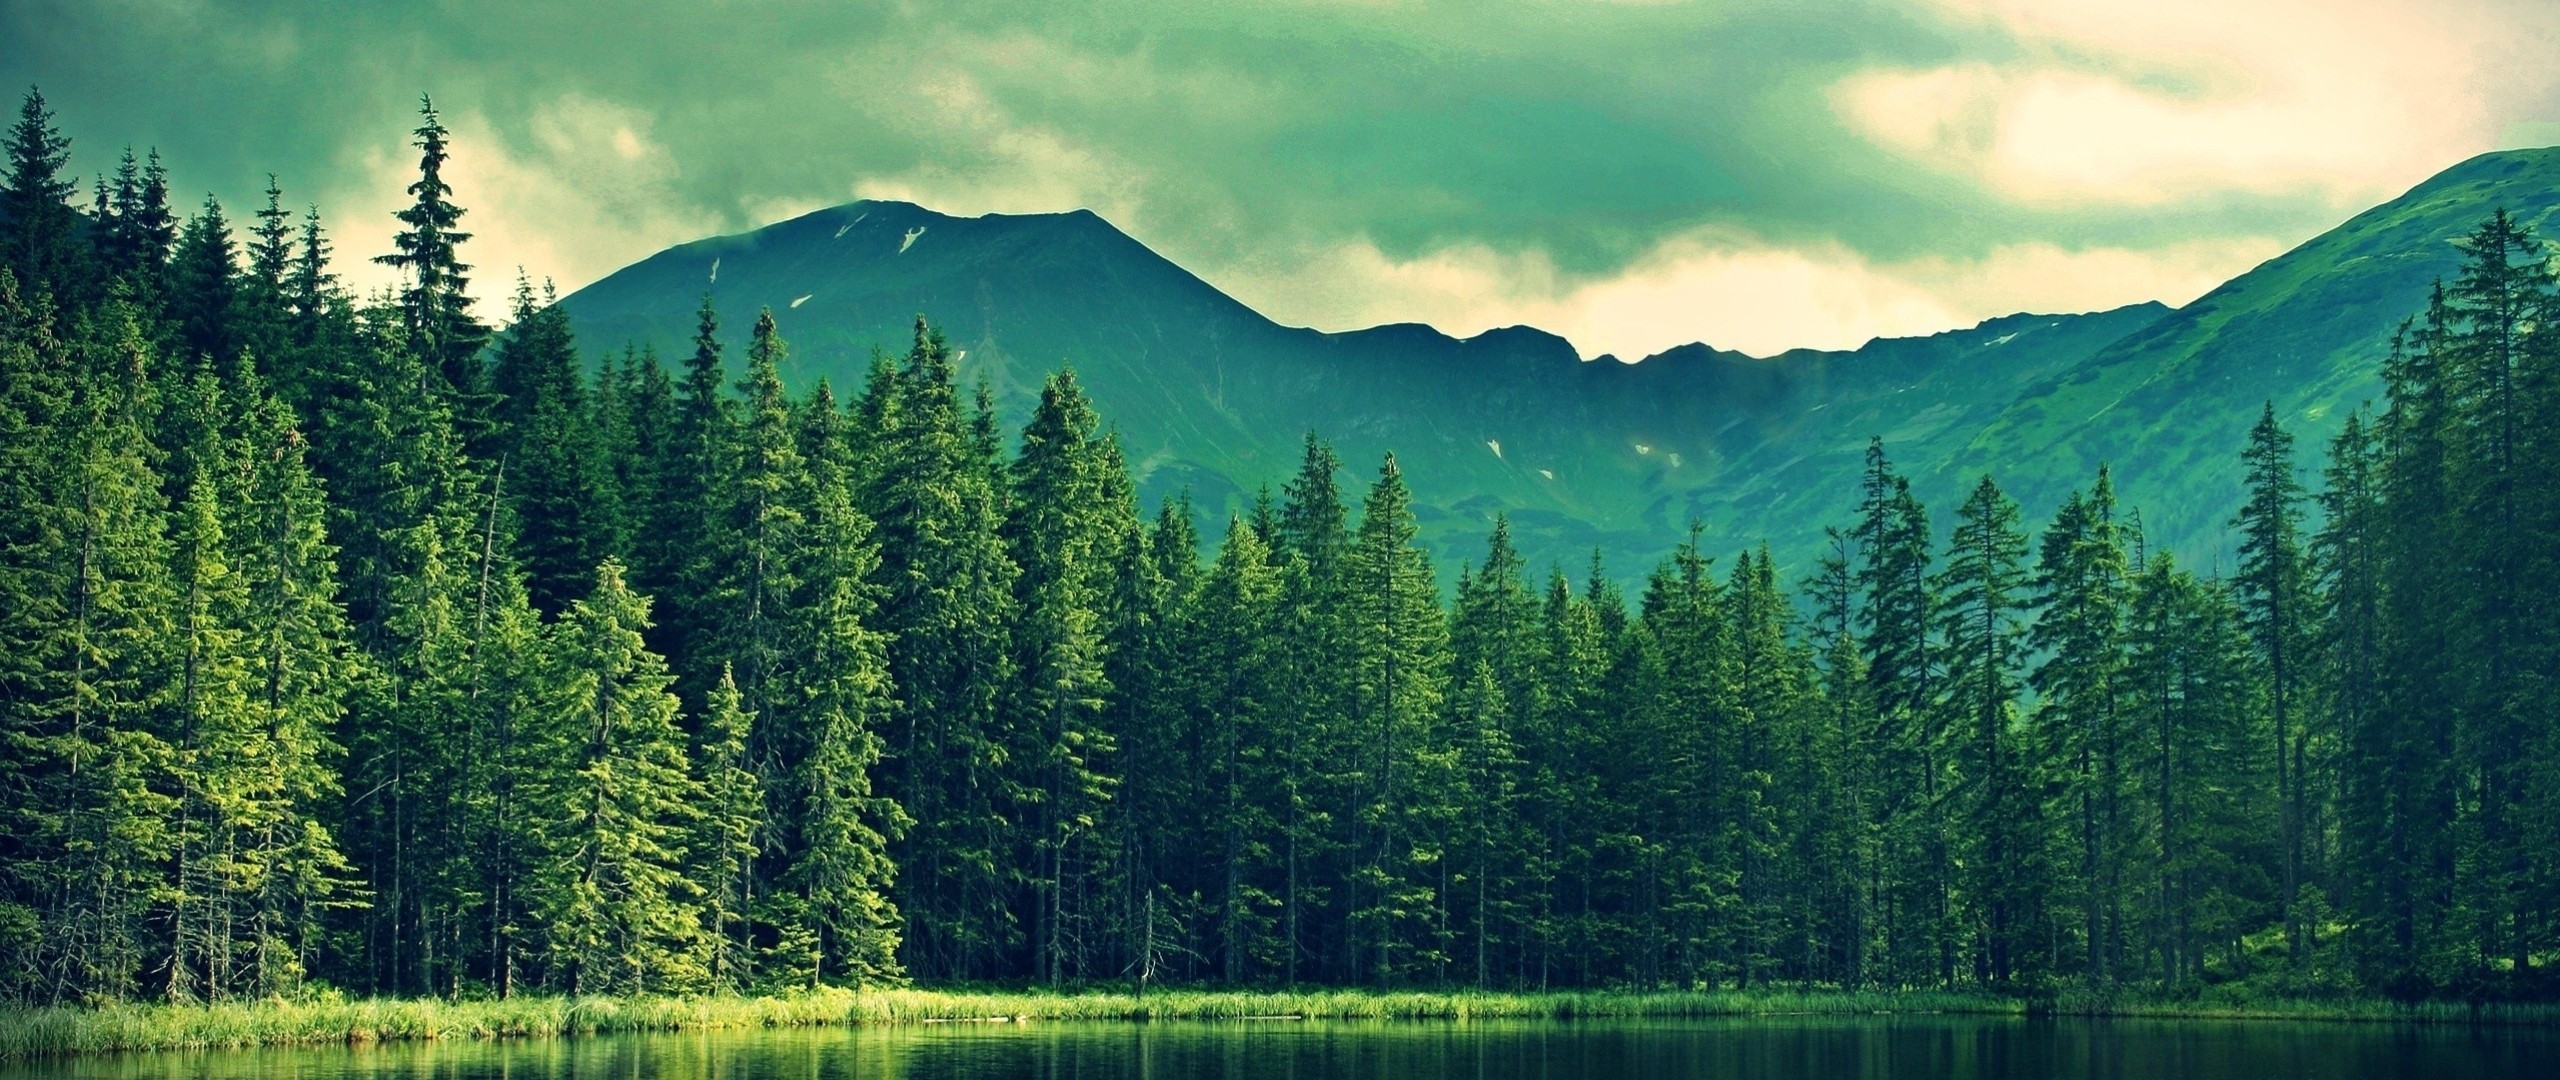 General 2560x1080 landscape mountains color correction forest pine trees nature